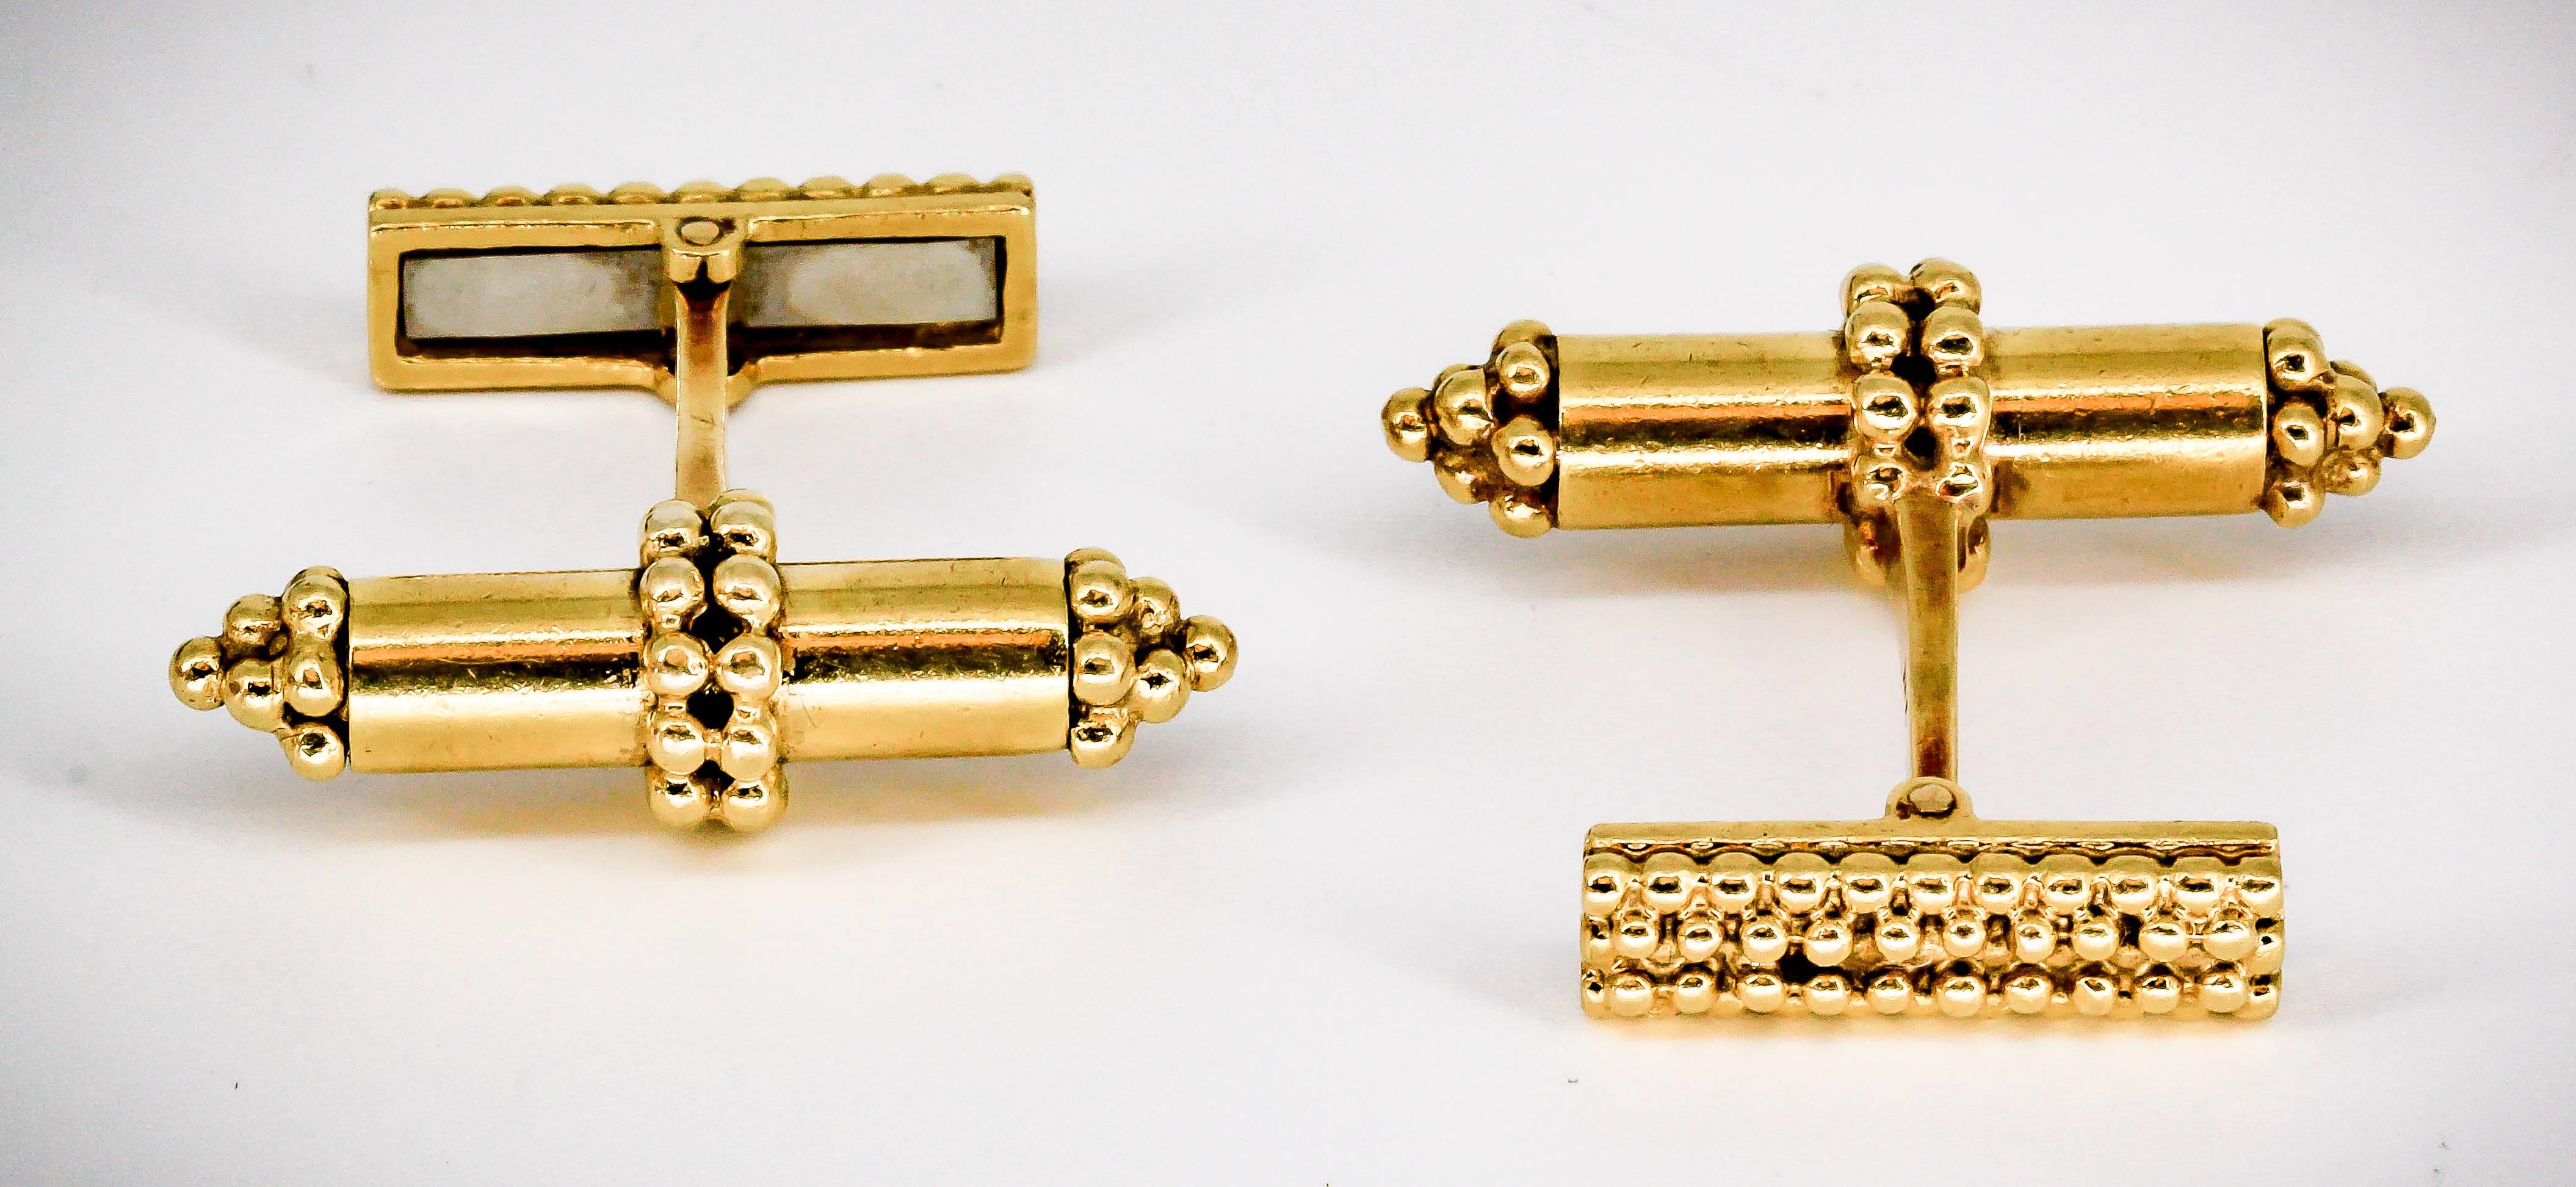 Handsome 18K yellow gold bar cufflinks by Tiffany & Co., circa 1970s, featuring gold bead accents. 

Hallmarks: Tiffany, 18k.